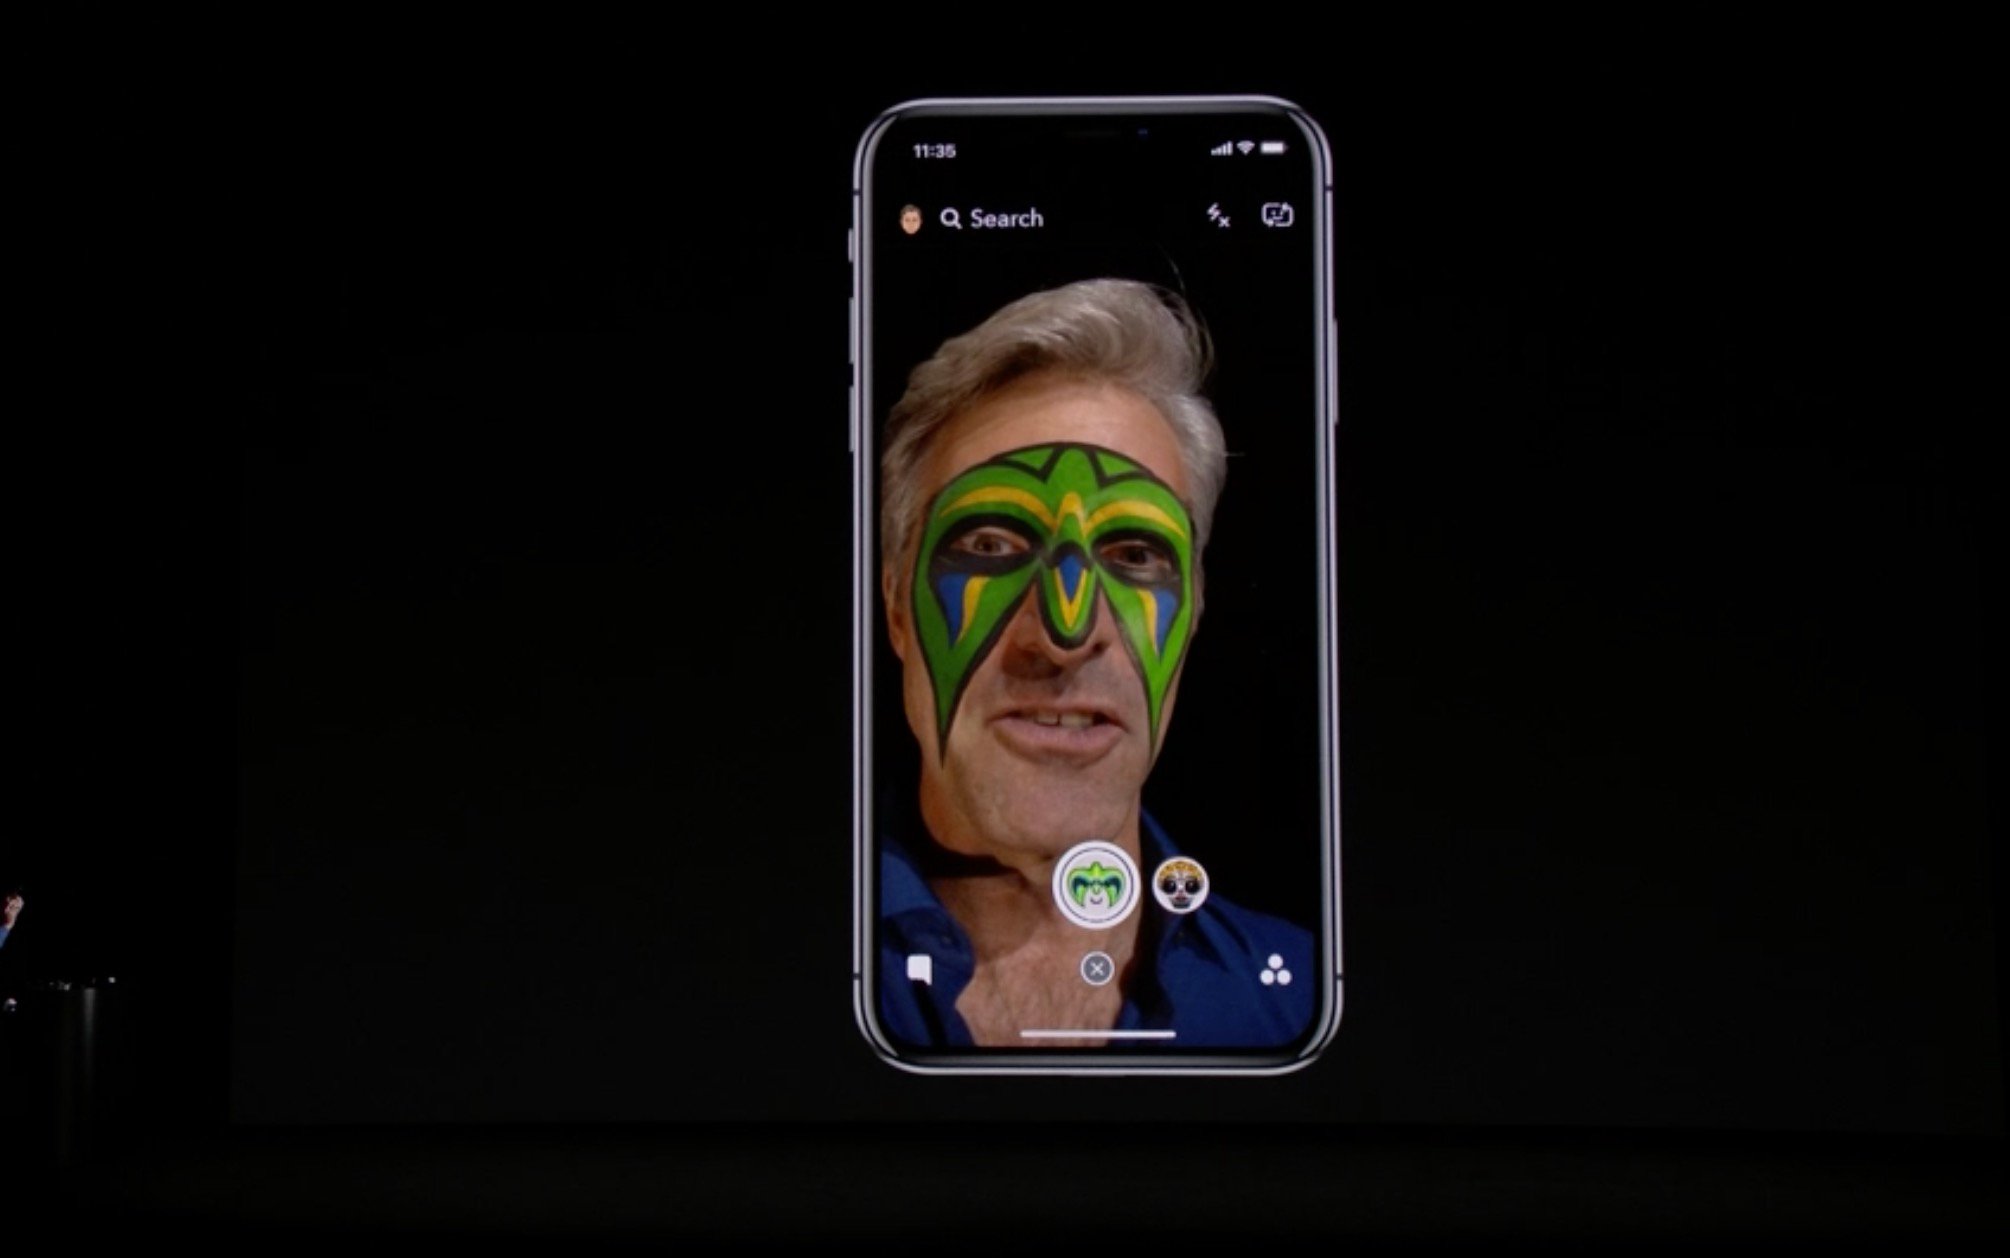 Craig Federighi demonstrates the upgraded Snapchat Lenses on the iPhone X.